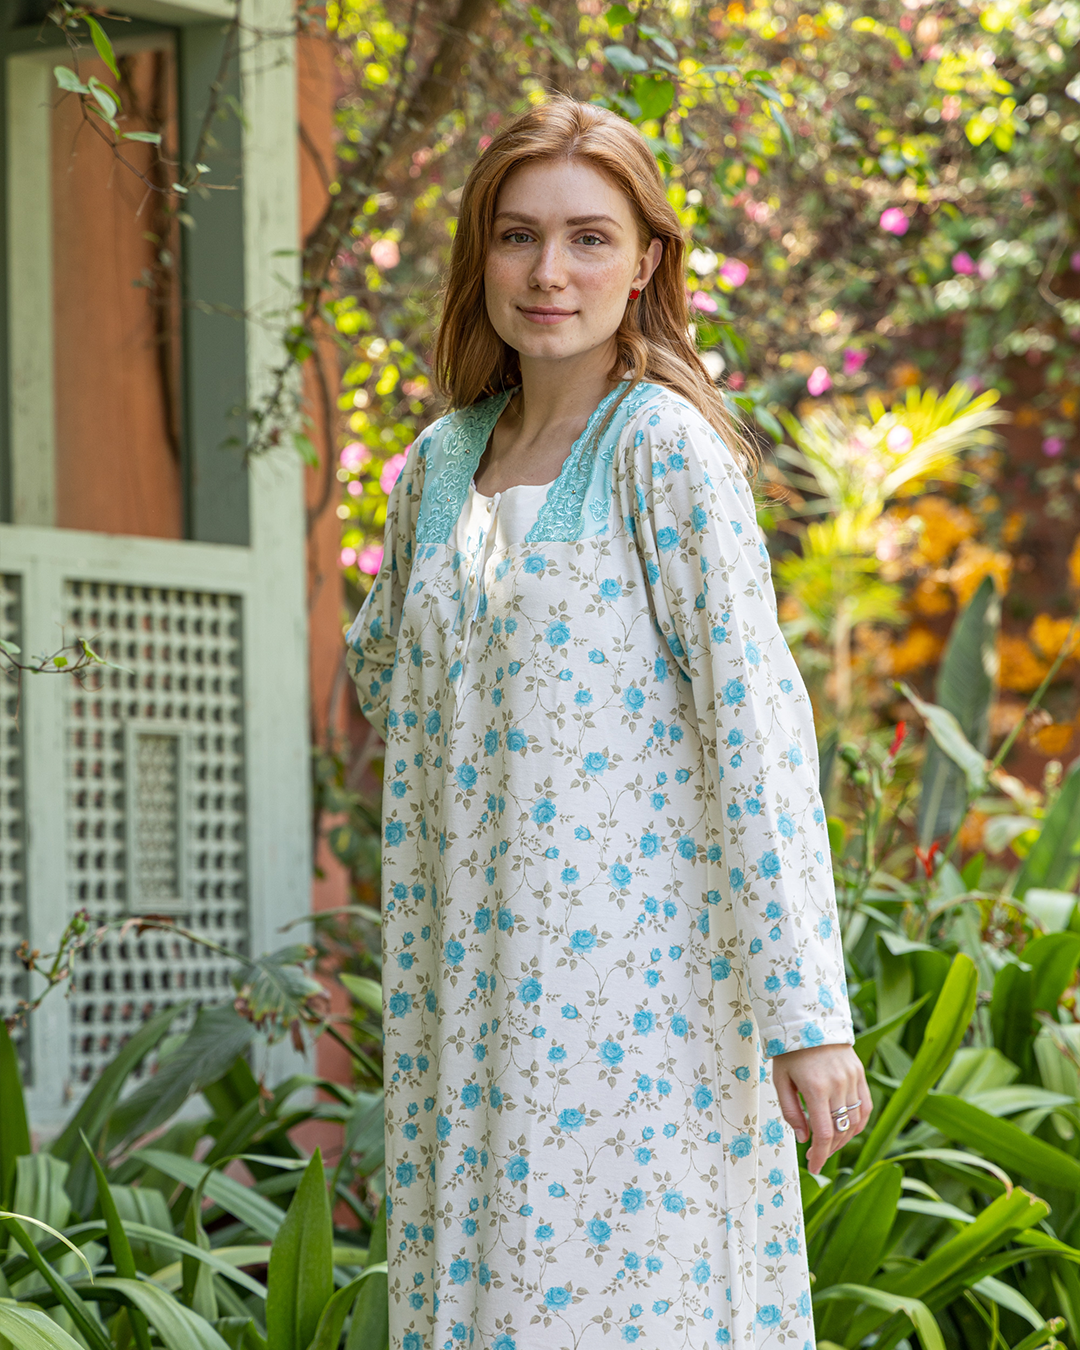 Women's nightshirt, half of its trip, lace and roses